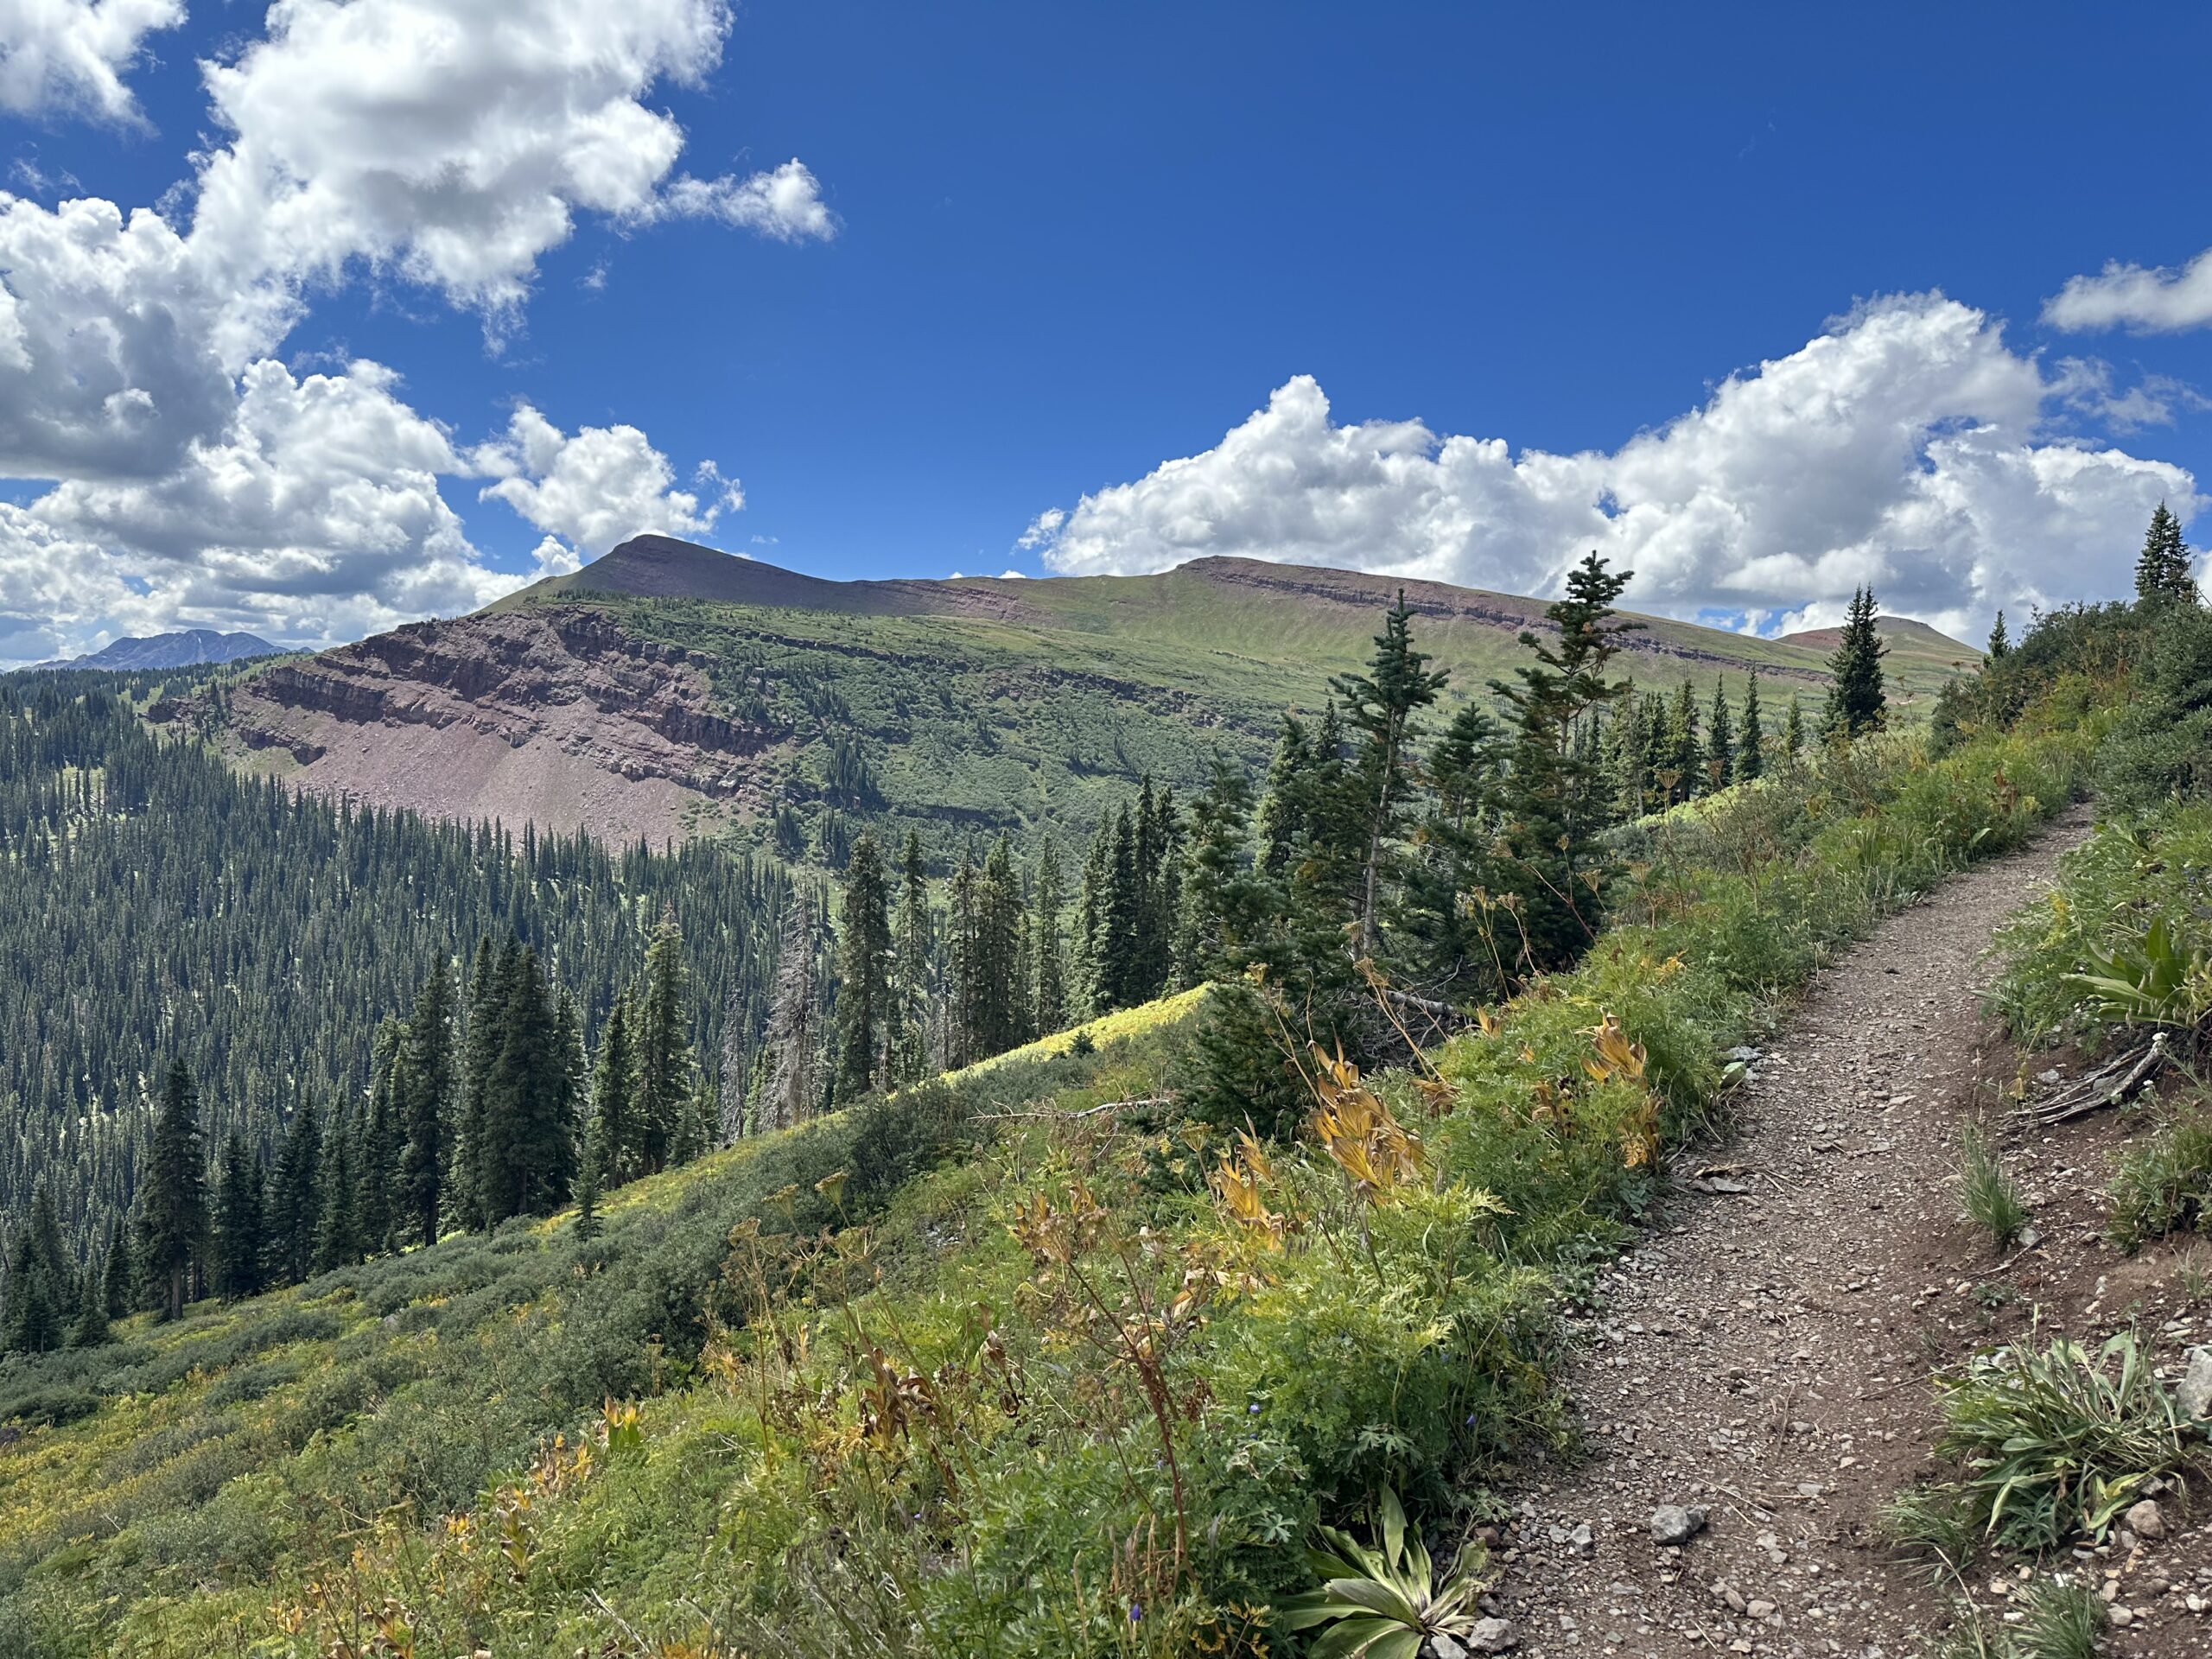 A photo I took from the Colorado Trail